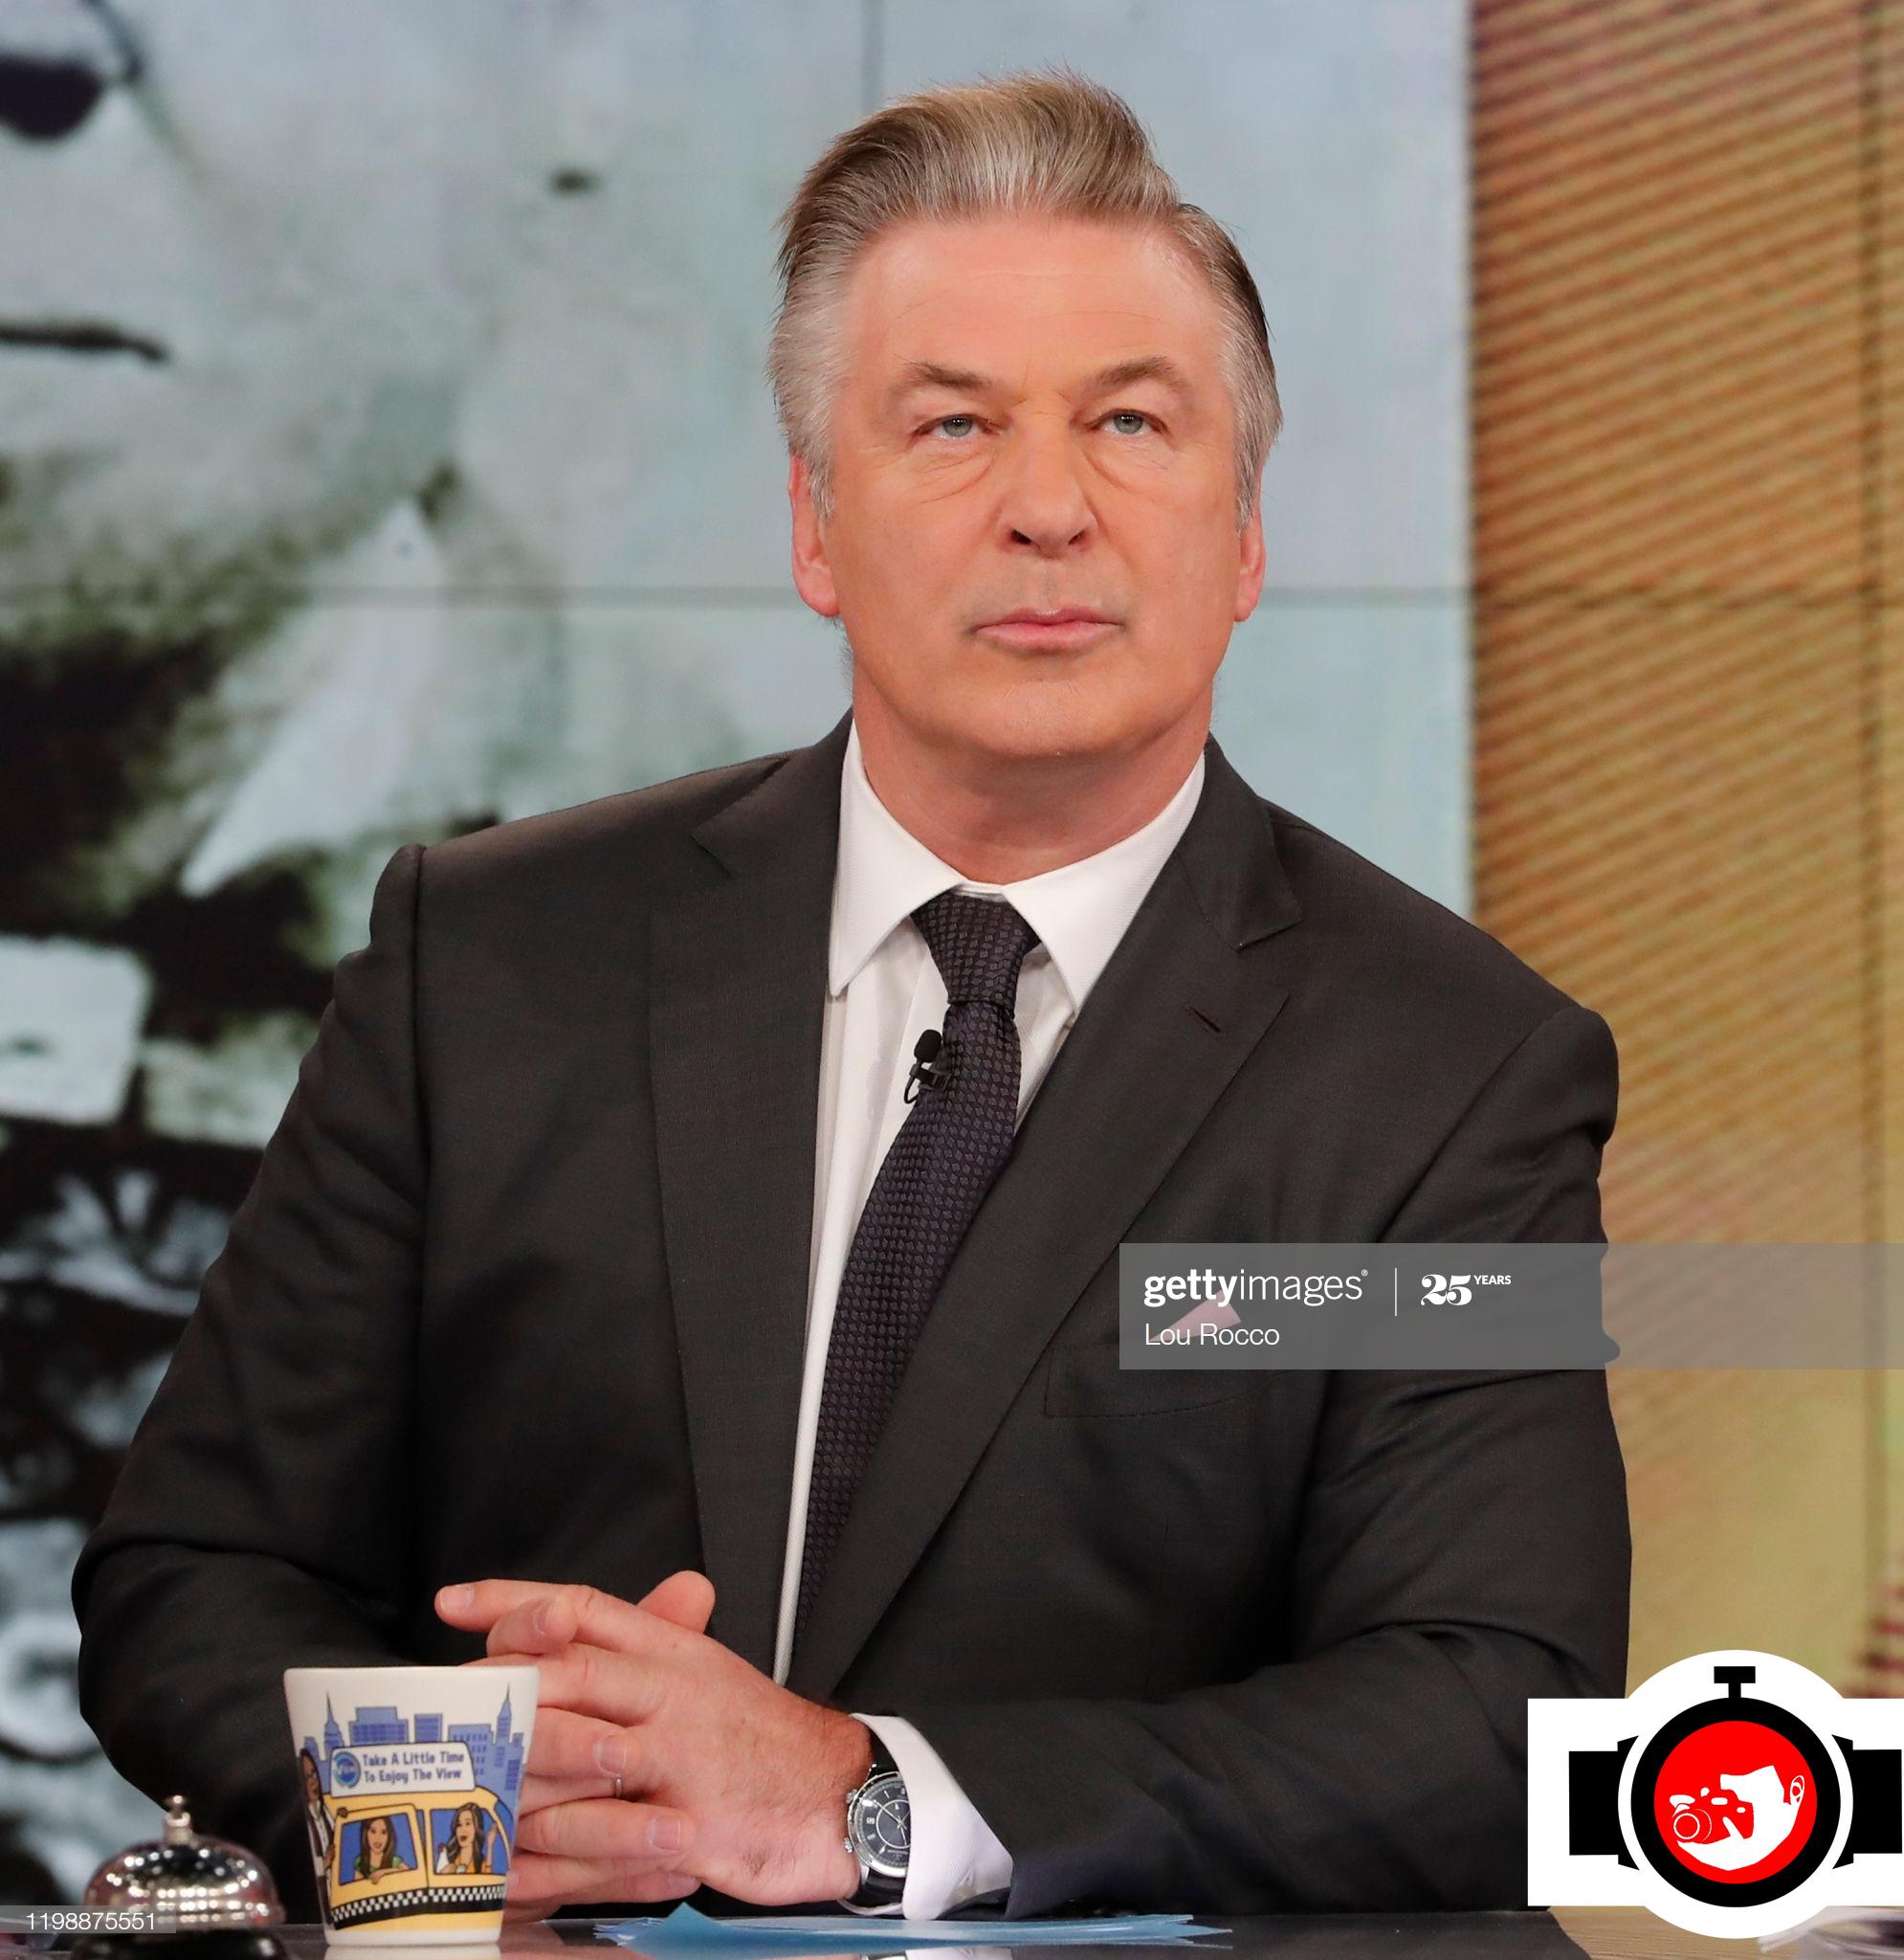 actor Alec Baldwin spotted wearing a Jaeger LeCoultre 